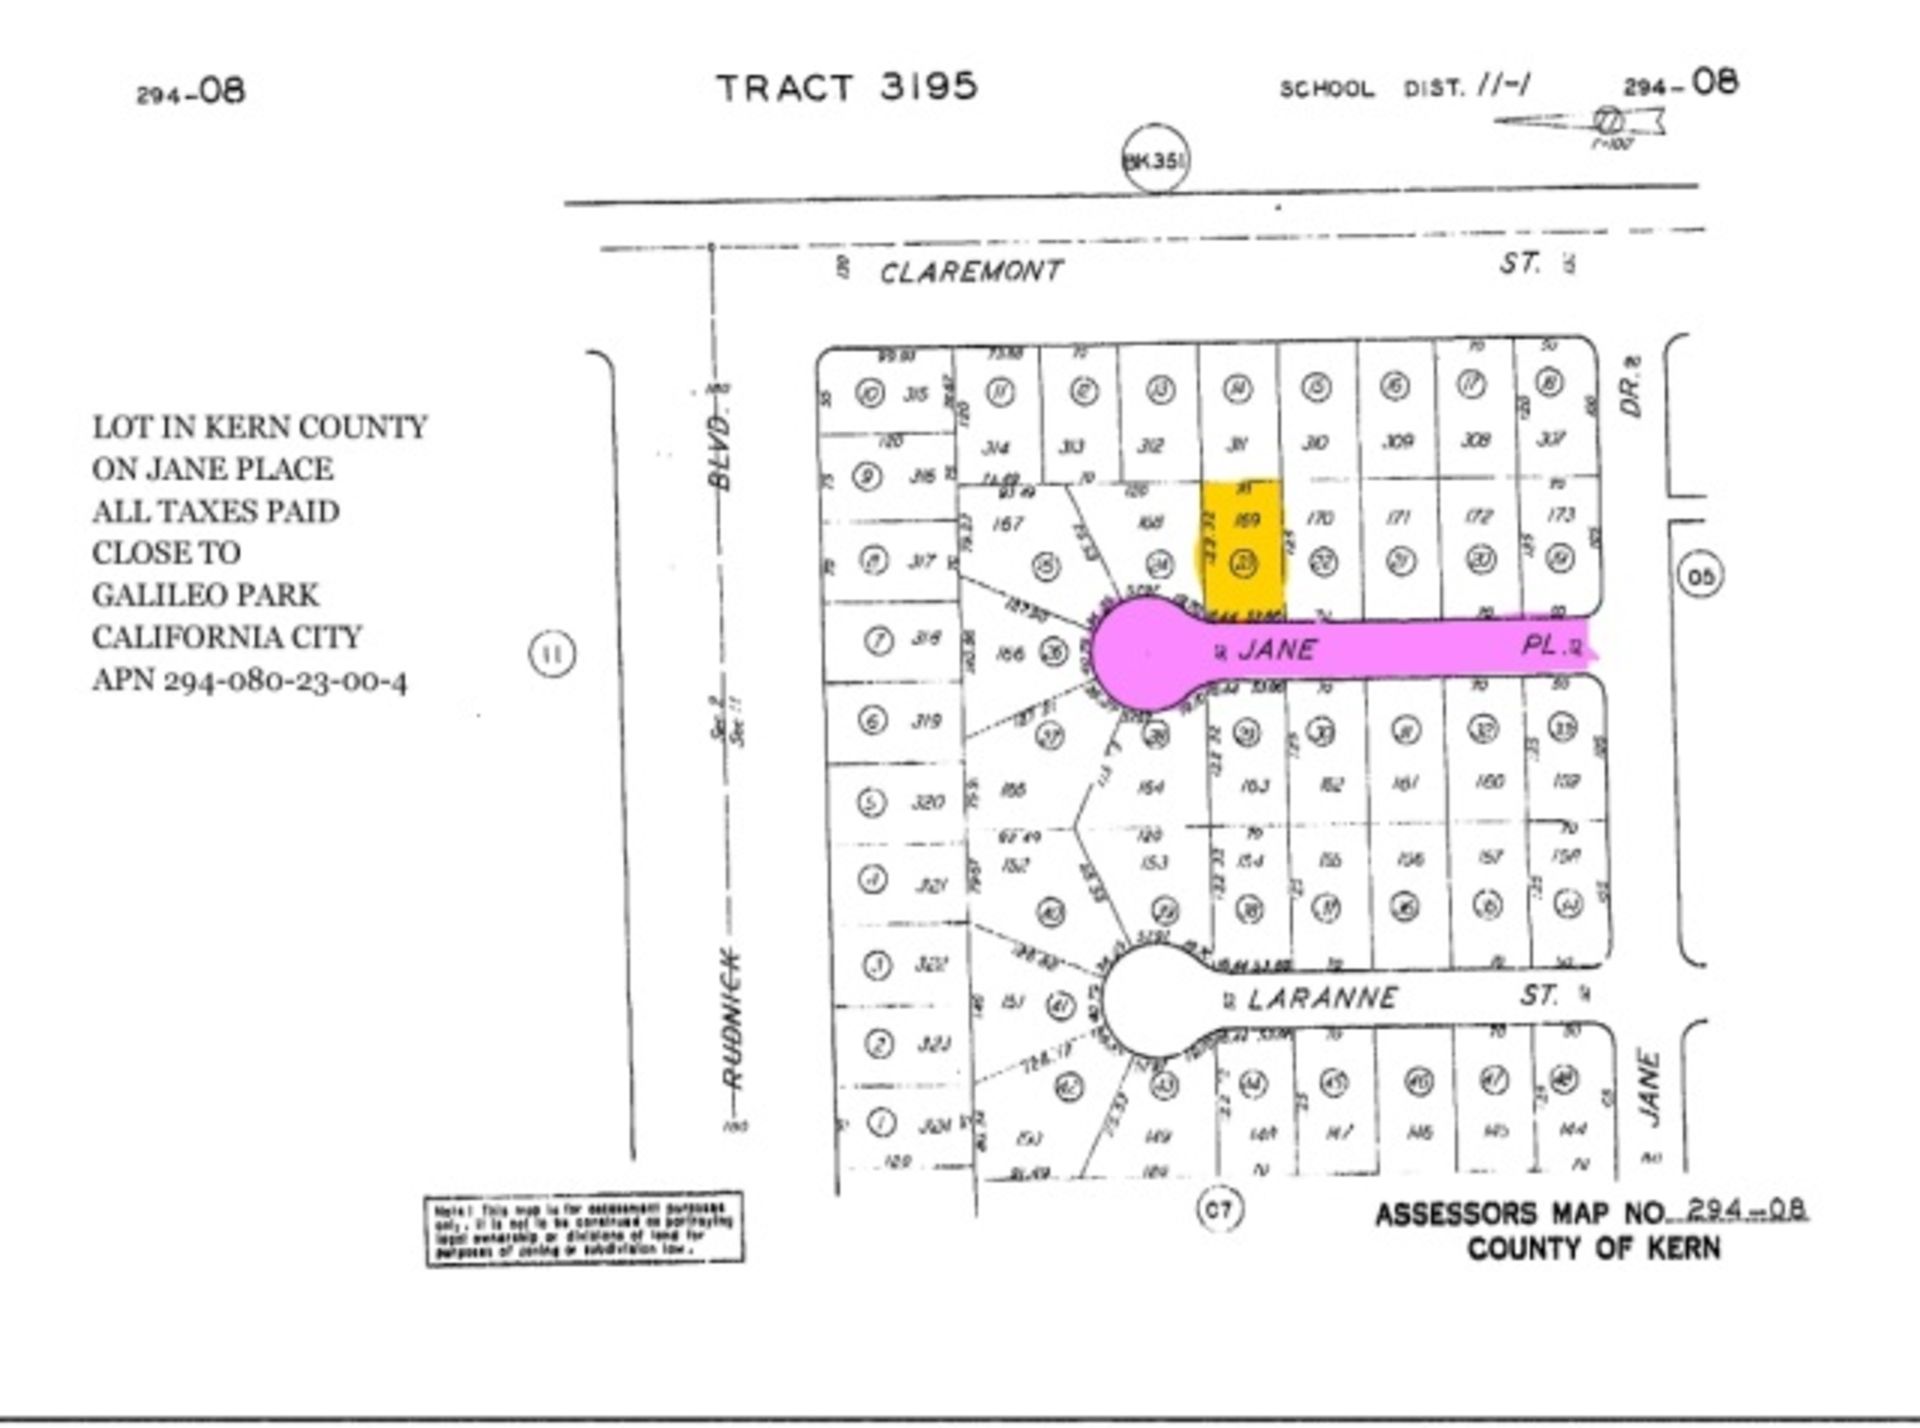 Lot In Kern County California, Located On Jane Place, Close To Galileo Park California City, Legal